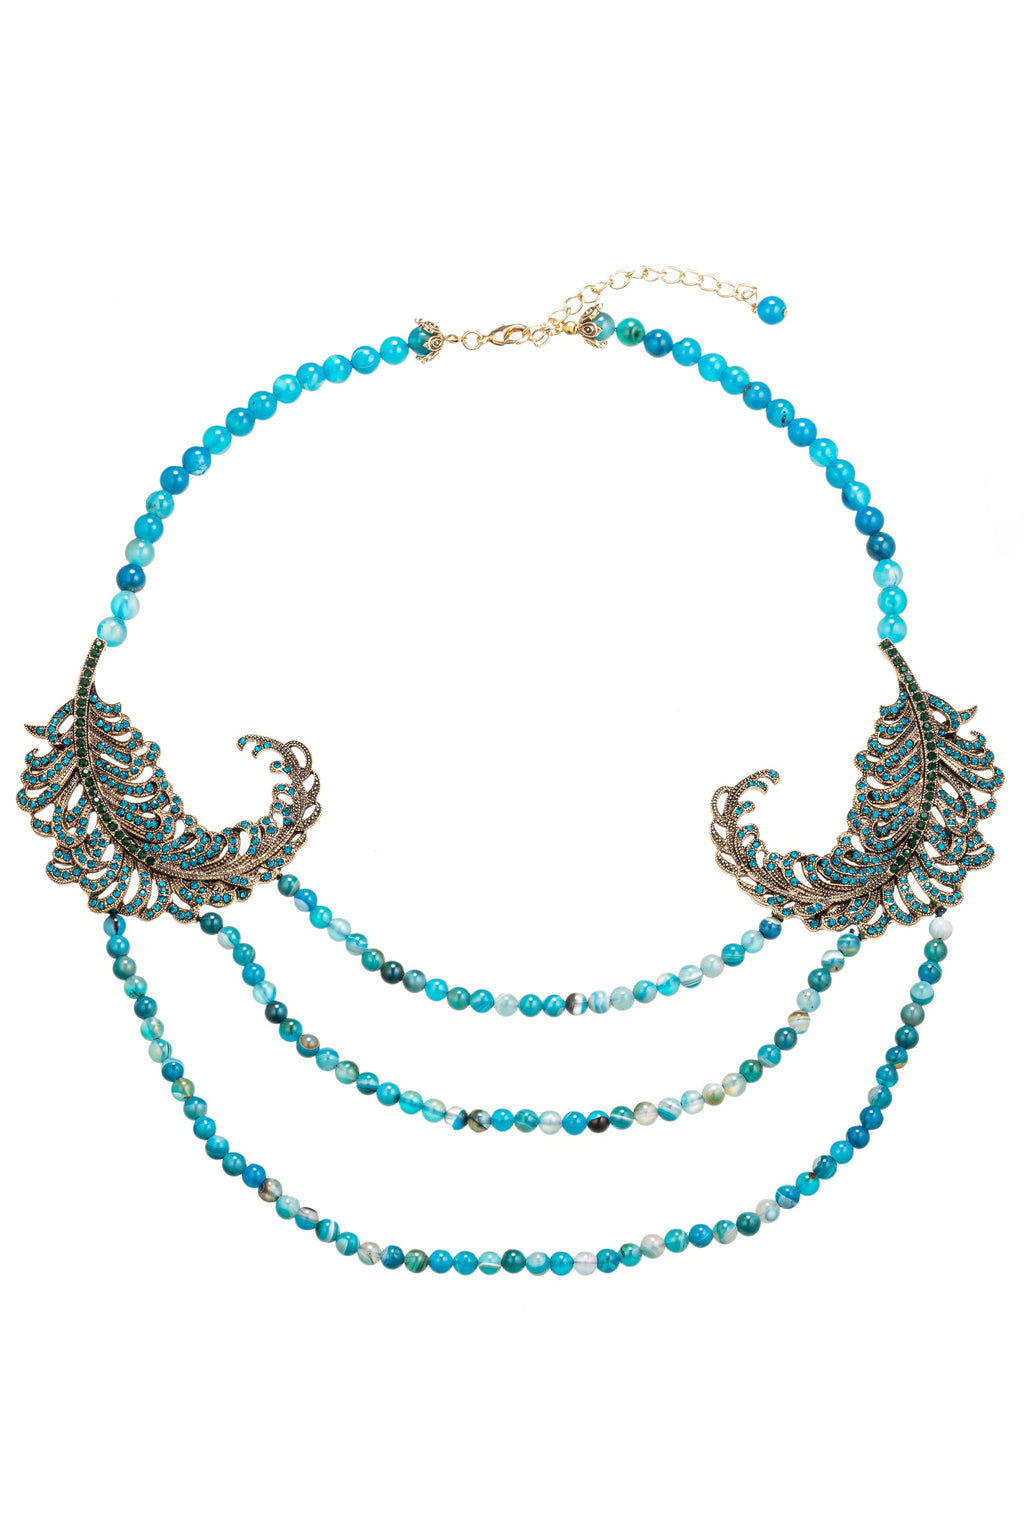 Gabriela Agate Peacock Beaded Necklace